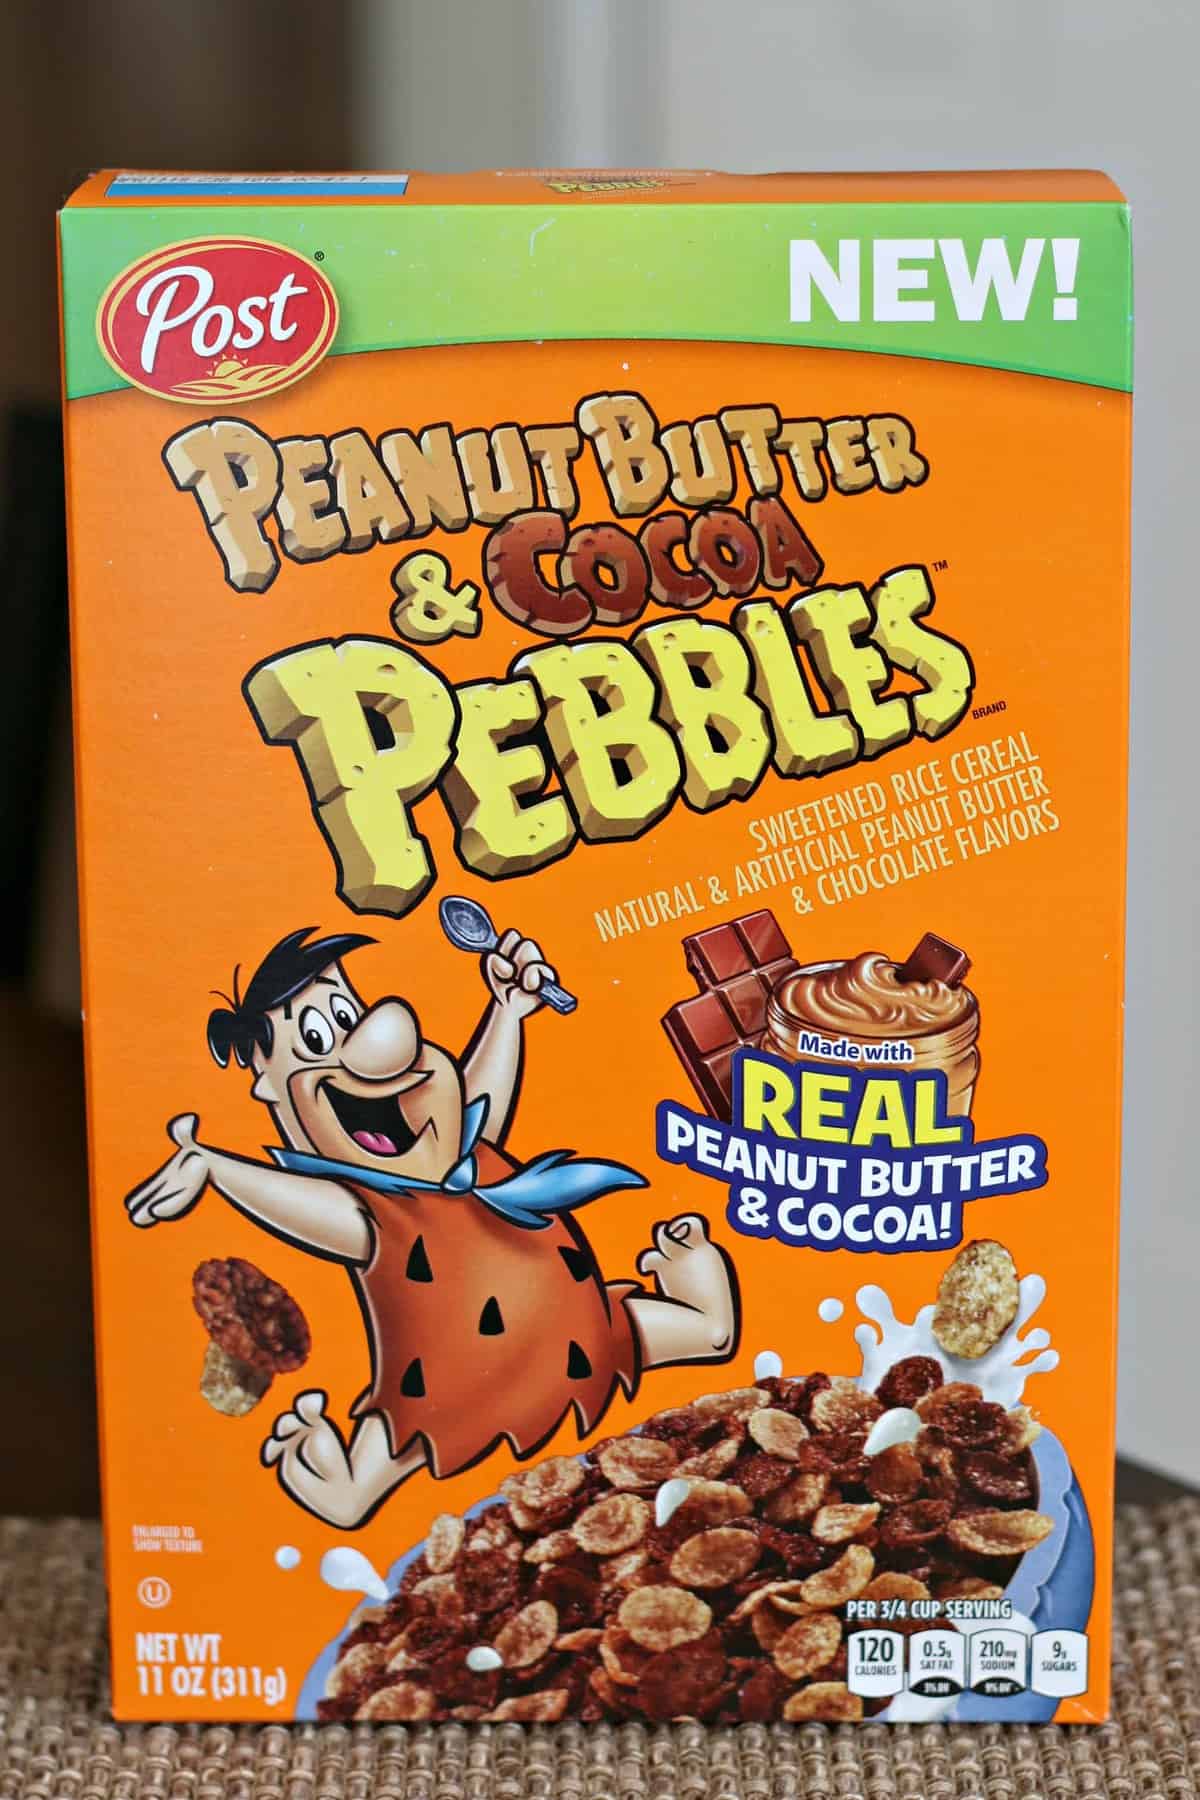 Box of Peanut Butter and Cocoa Pebbles